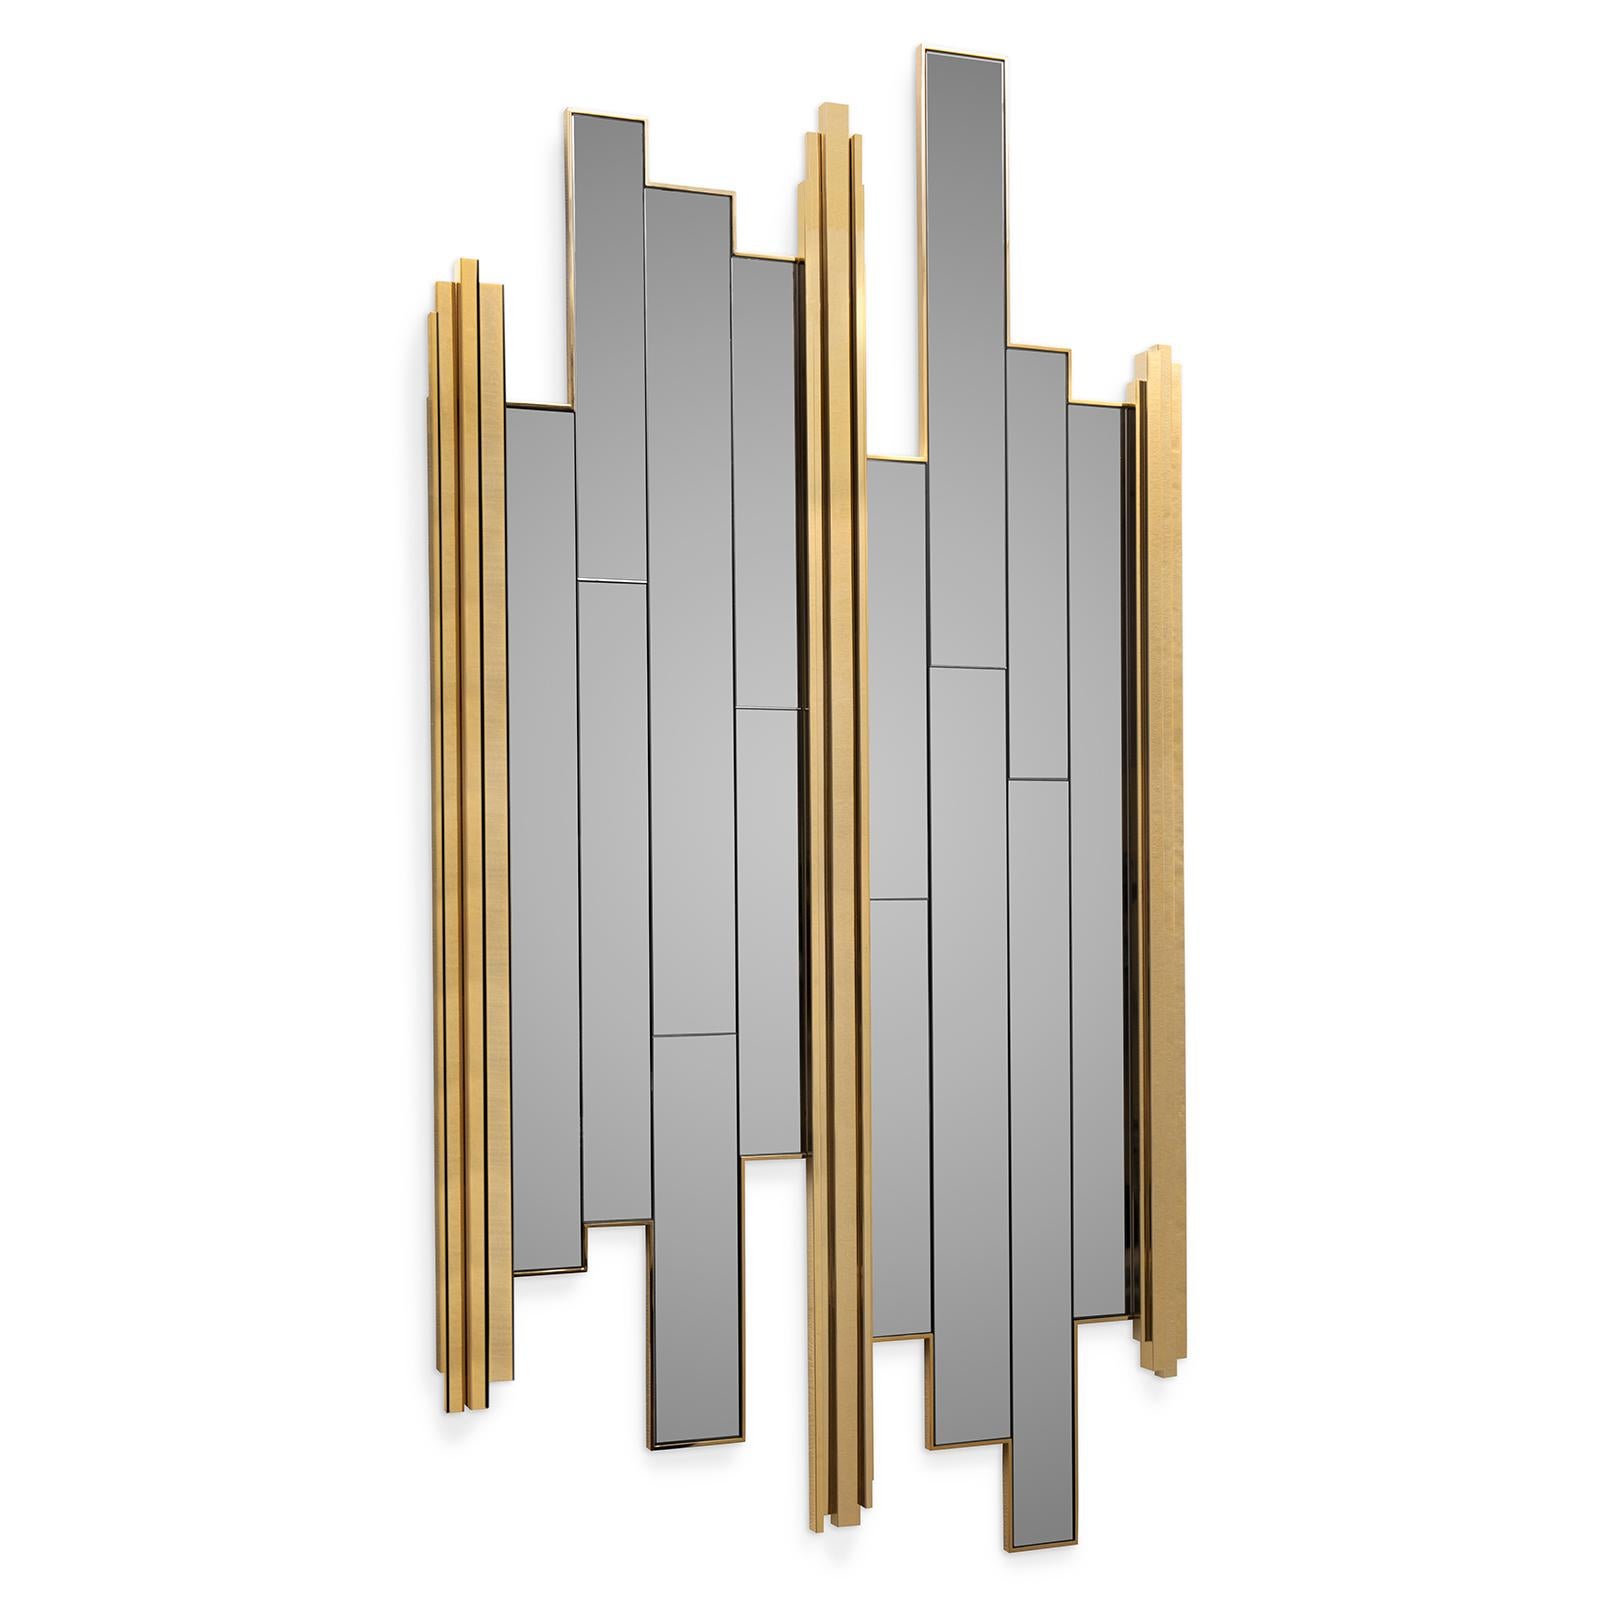 Mirror ambassador with solid brass frame and
solid brass rods shape in polished finish. With
mirror glass.